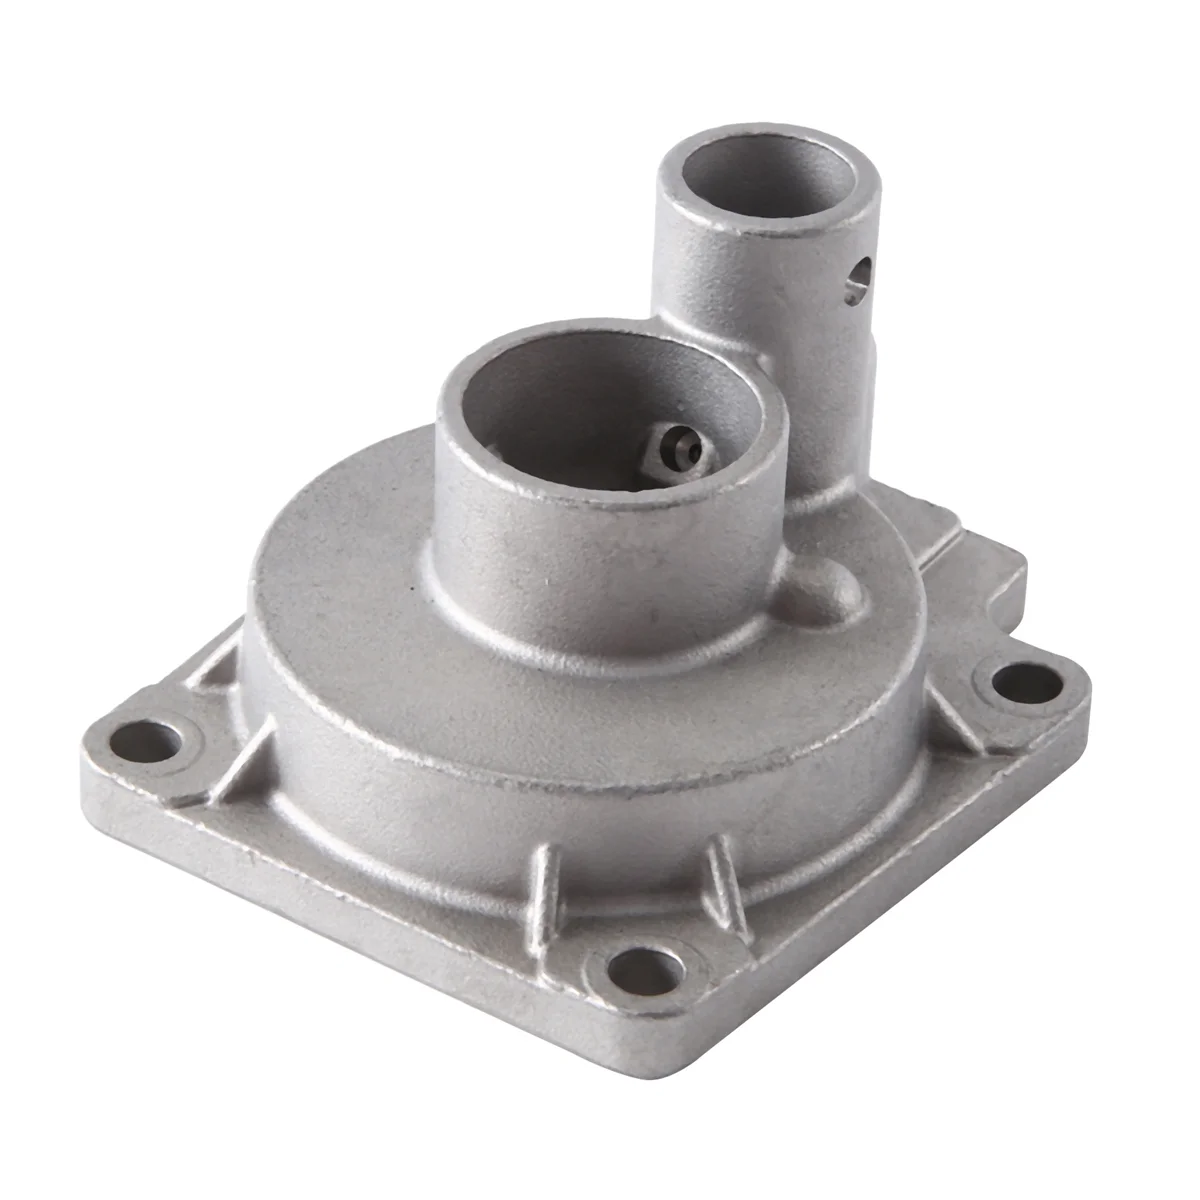 

17411-94421 Stainless Steel Case Water Pump for Suzuki Outboard Motor 2T 20 25 30 40 HP 18-3481,17411-94400